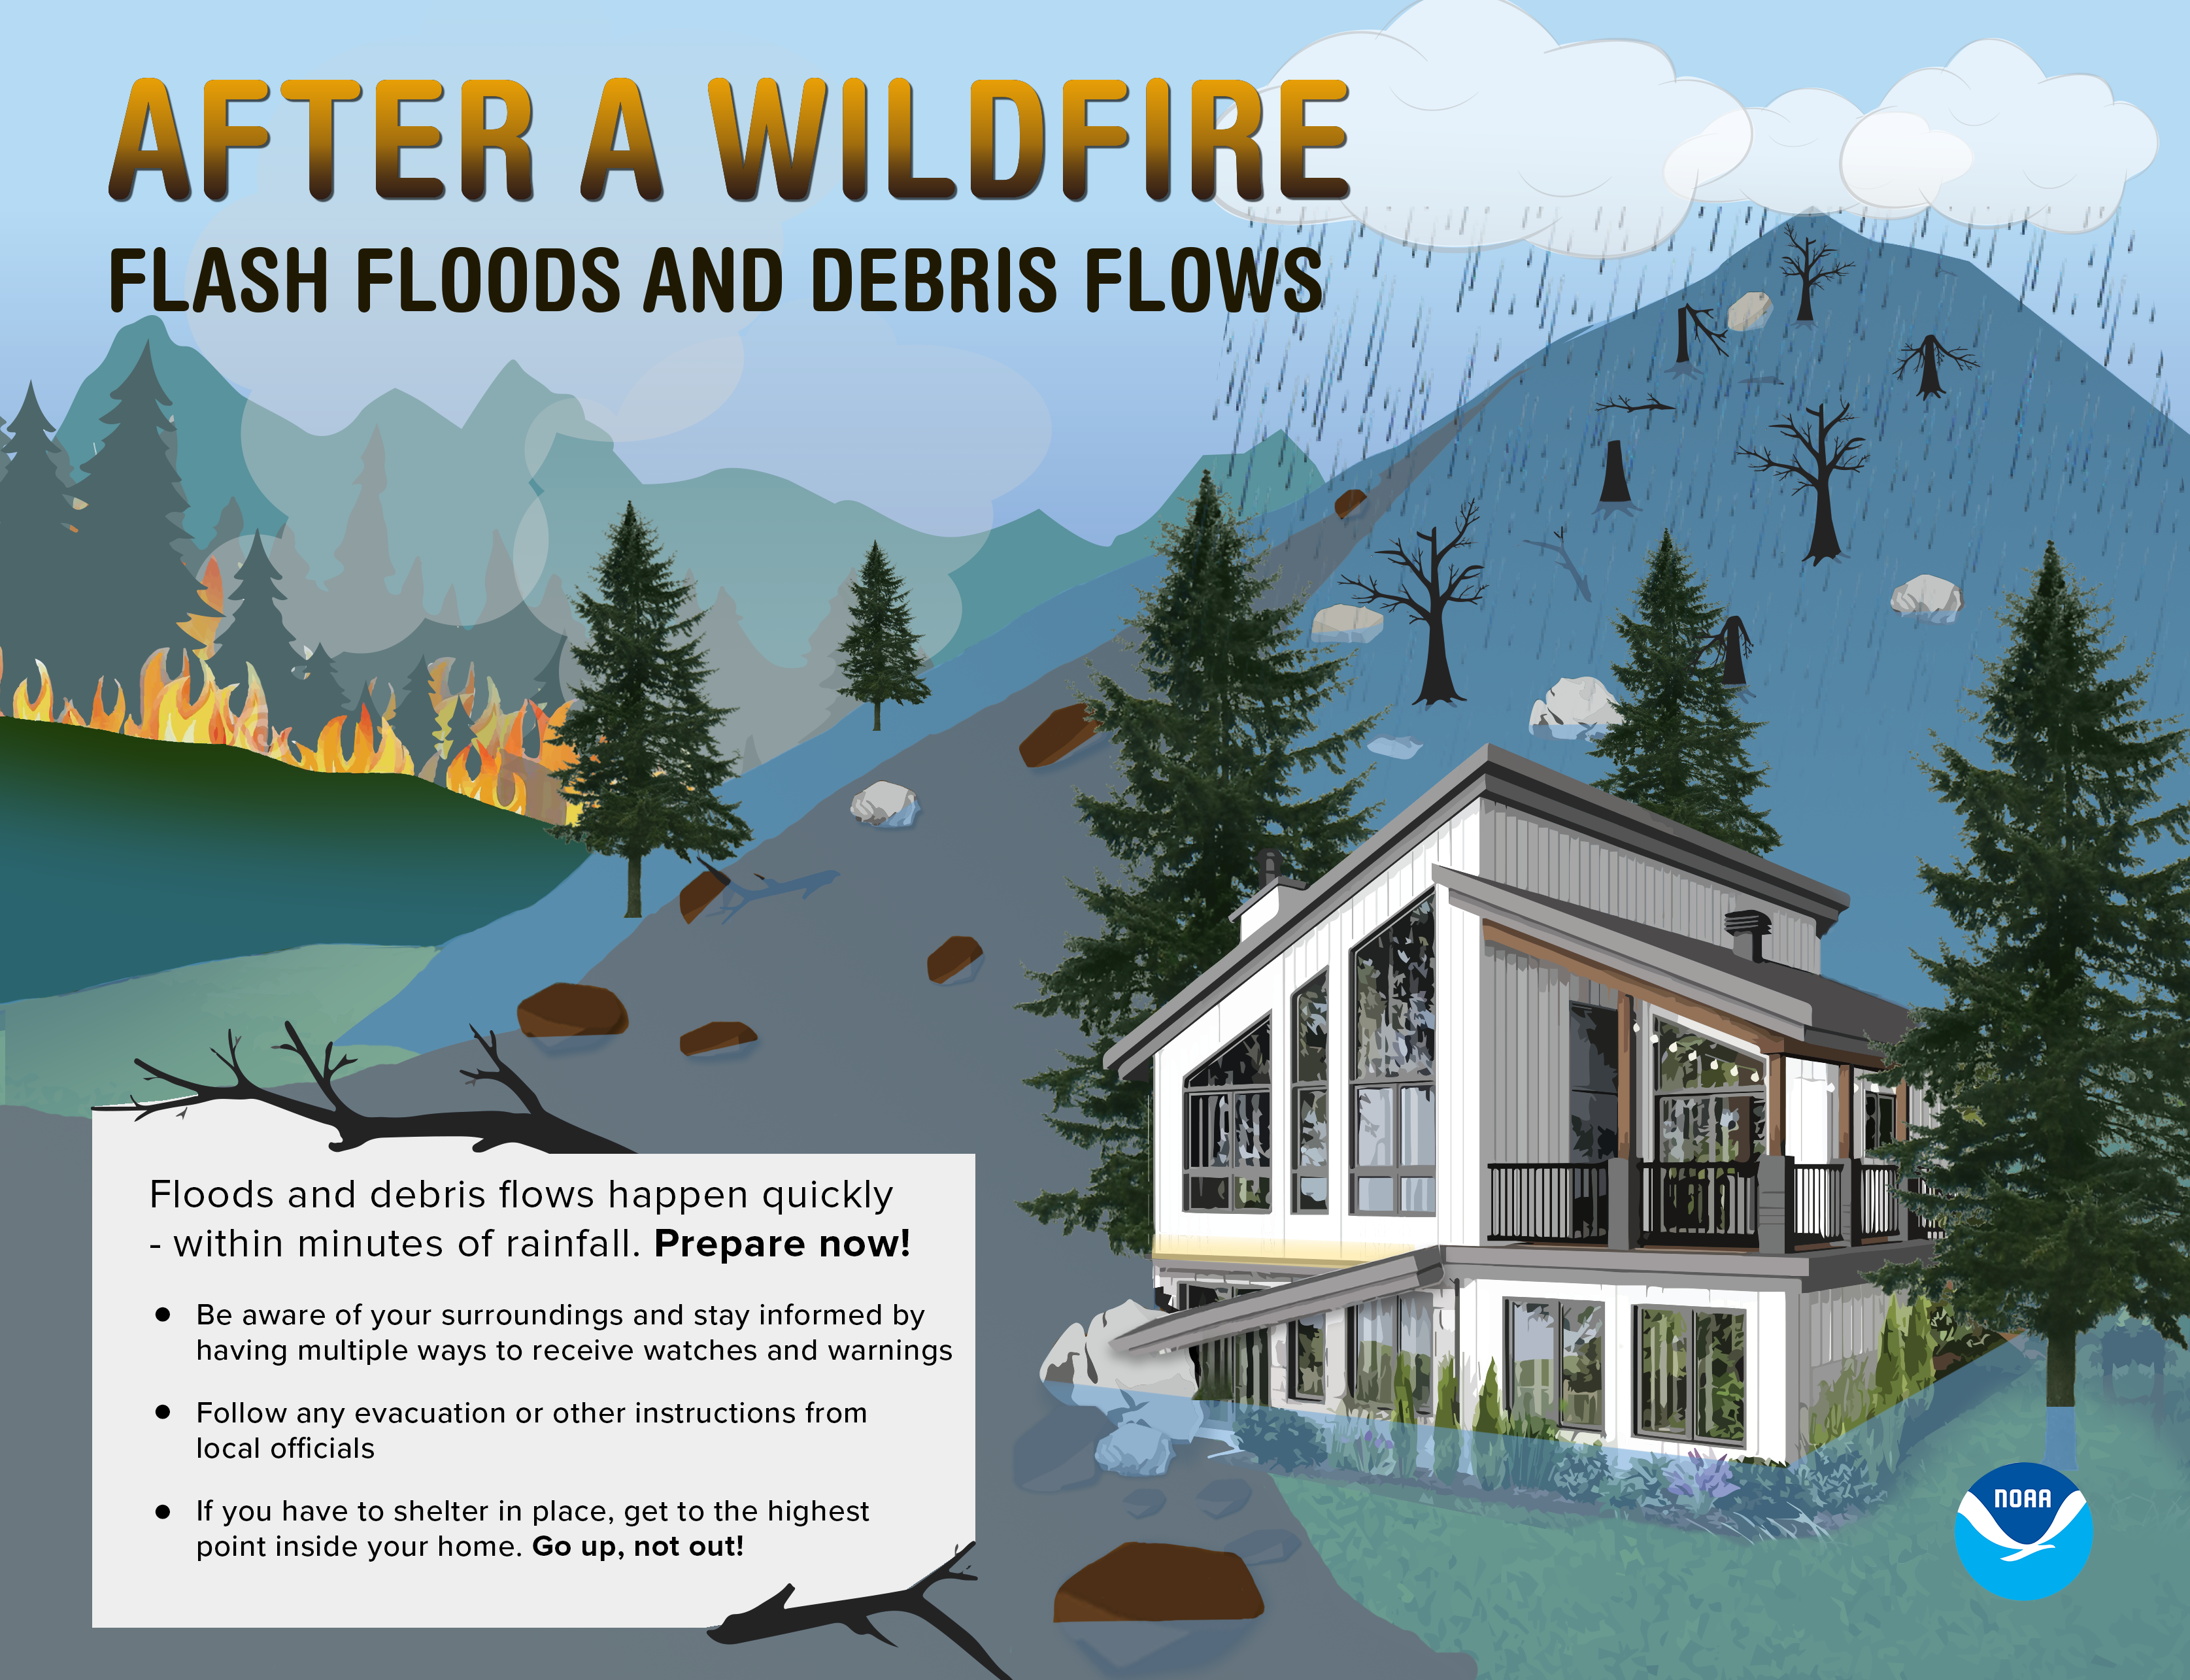 After a Wildfire: Flash Floods and Debris Flows